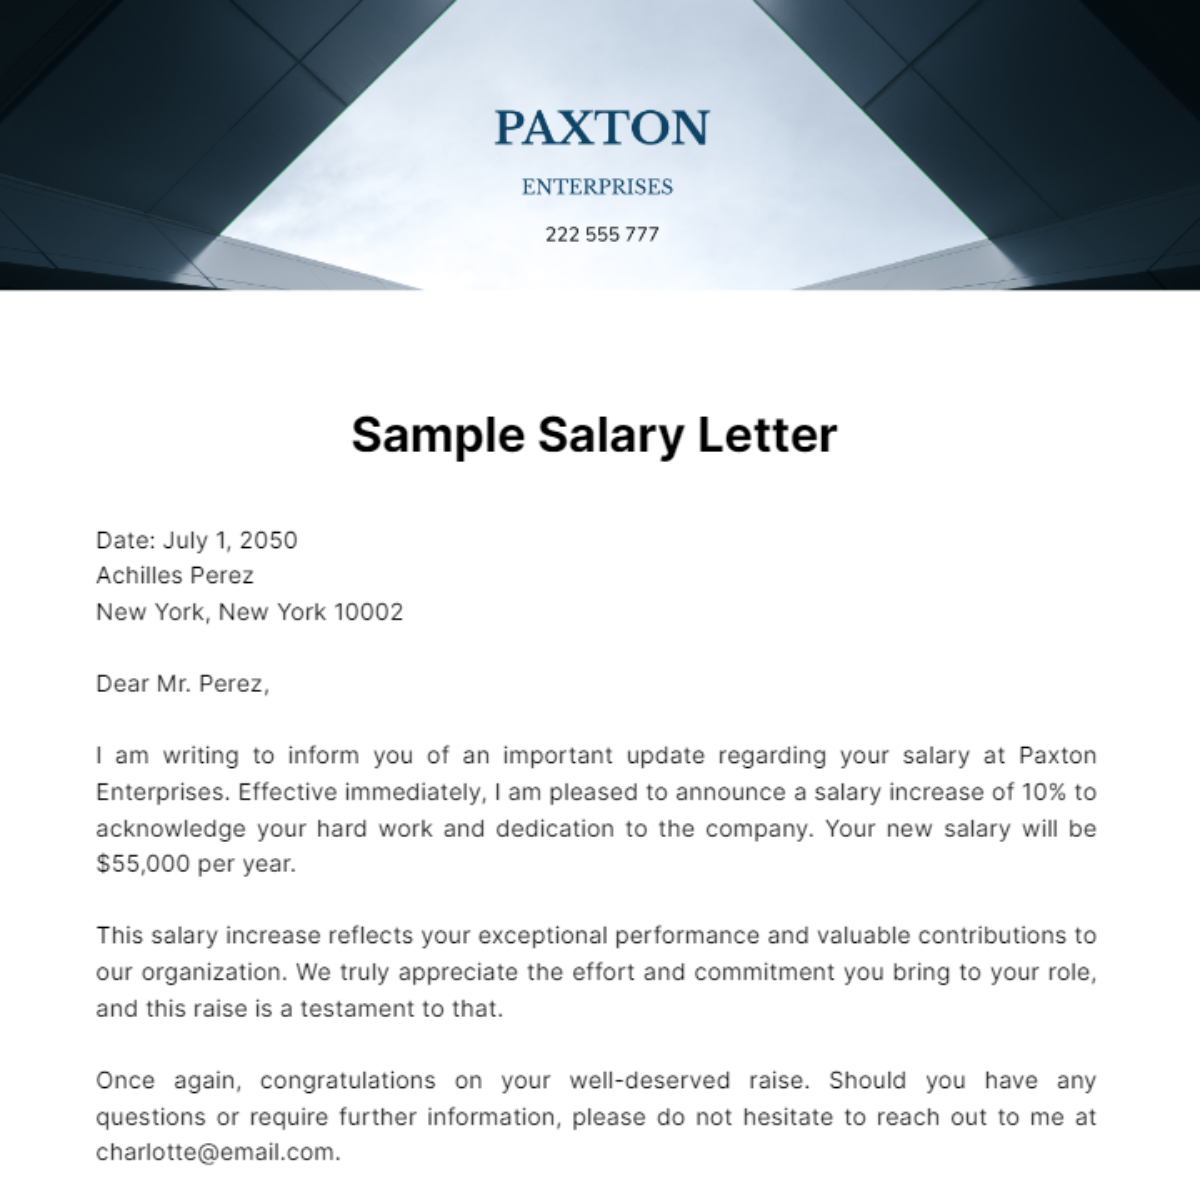 Free Sample Salary Letter Template